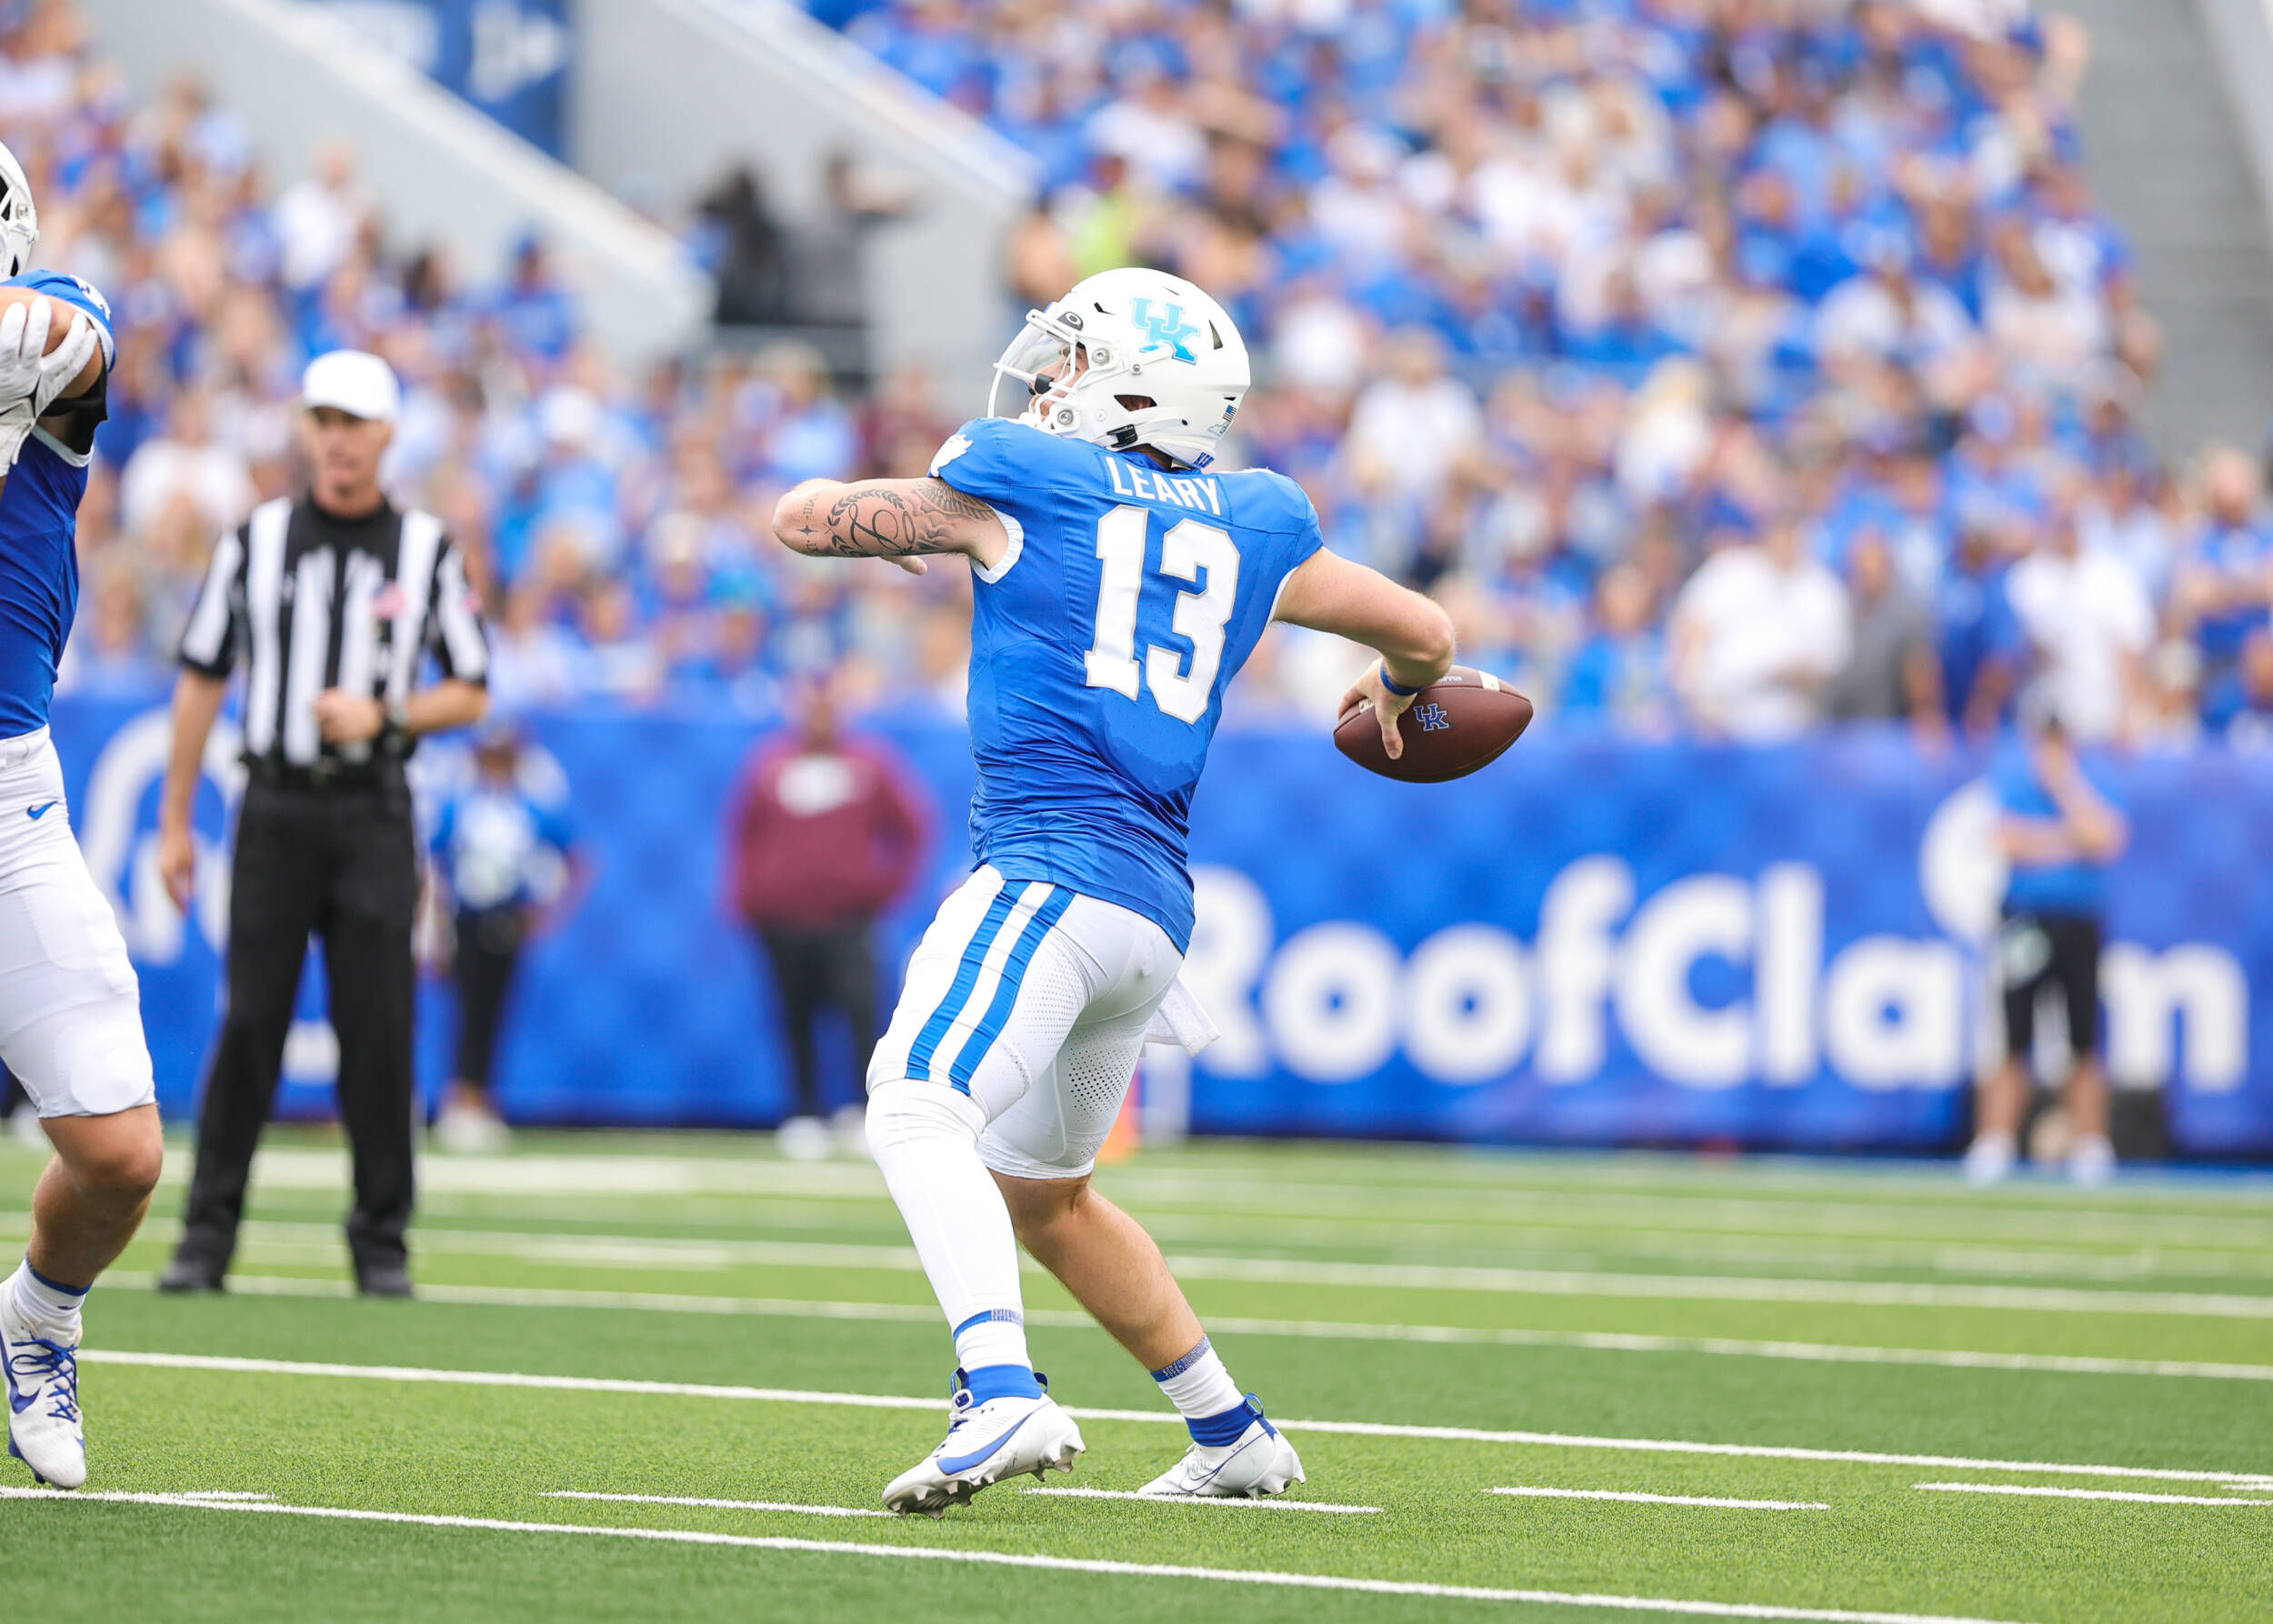 Leary Leads Kentucky Past Eastern Kentucky on Saturday